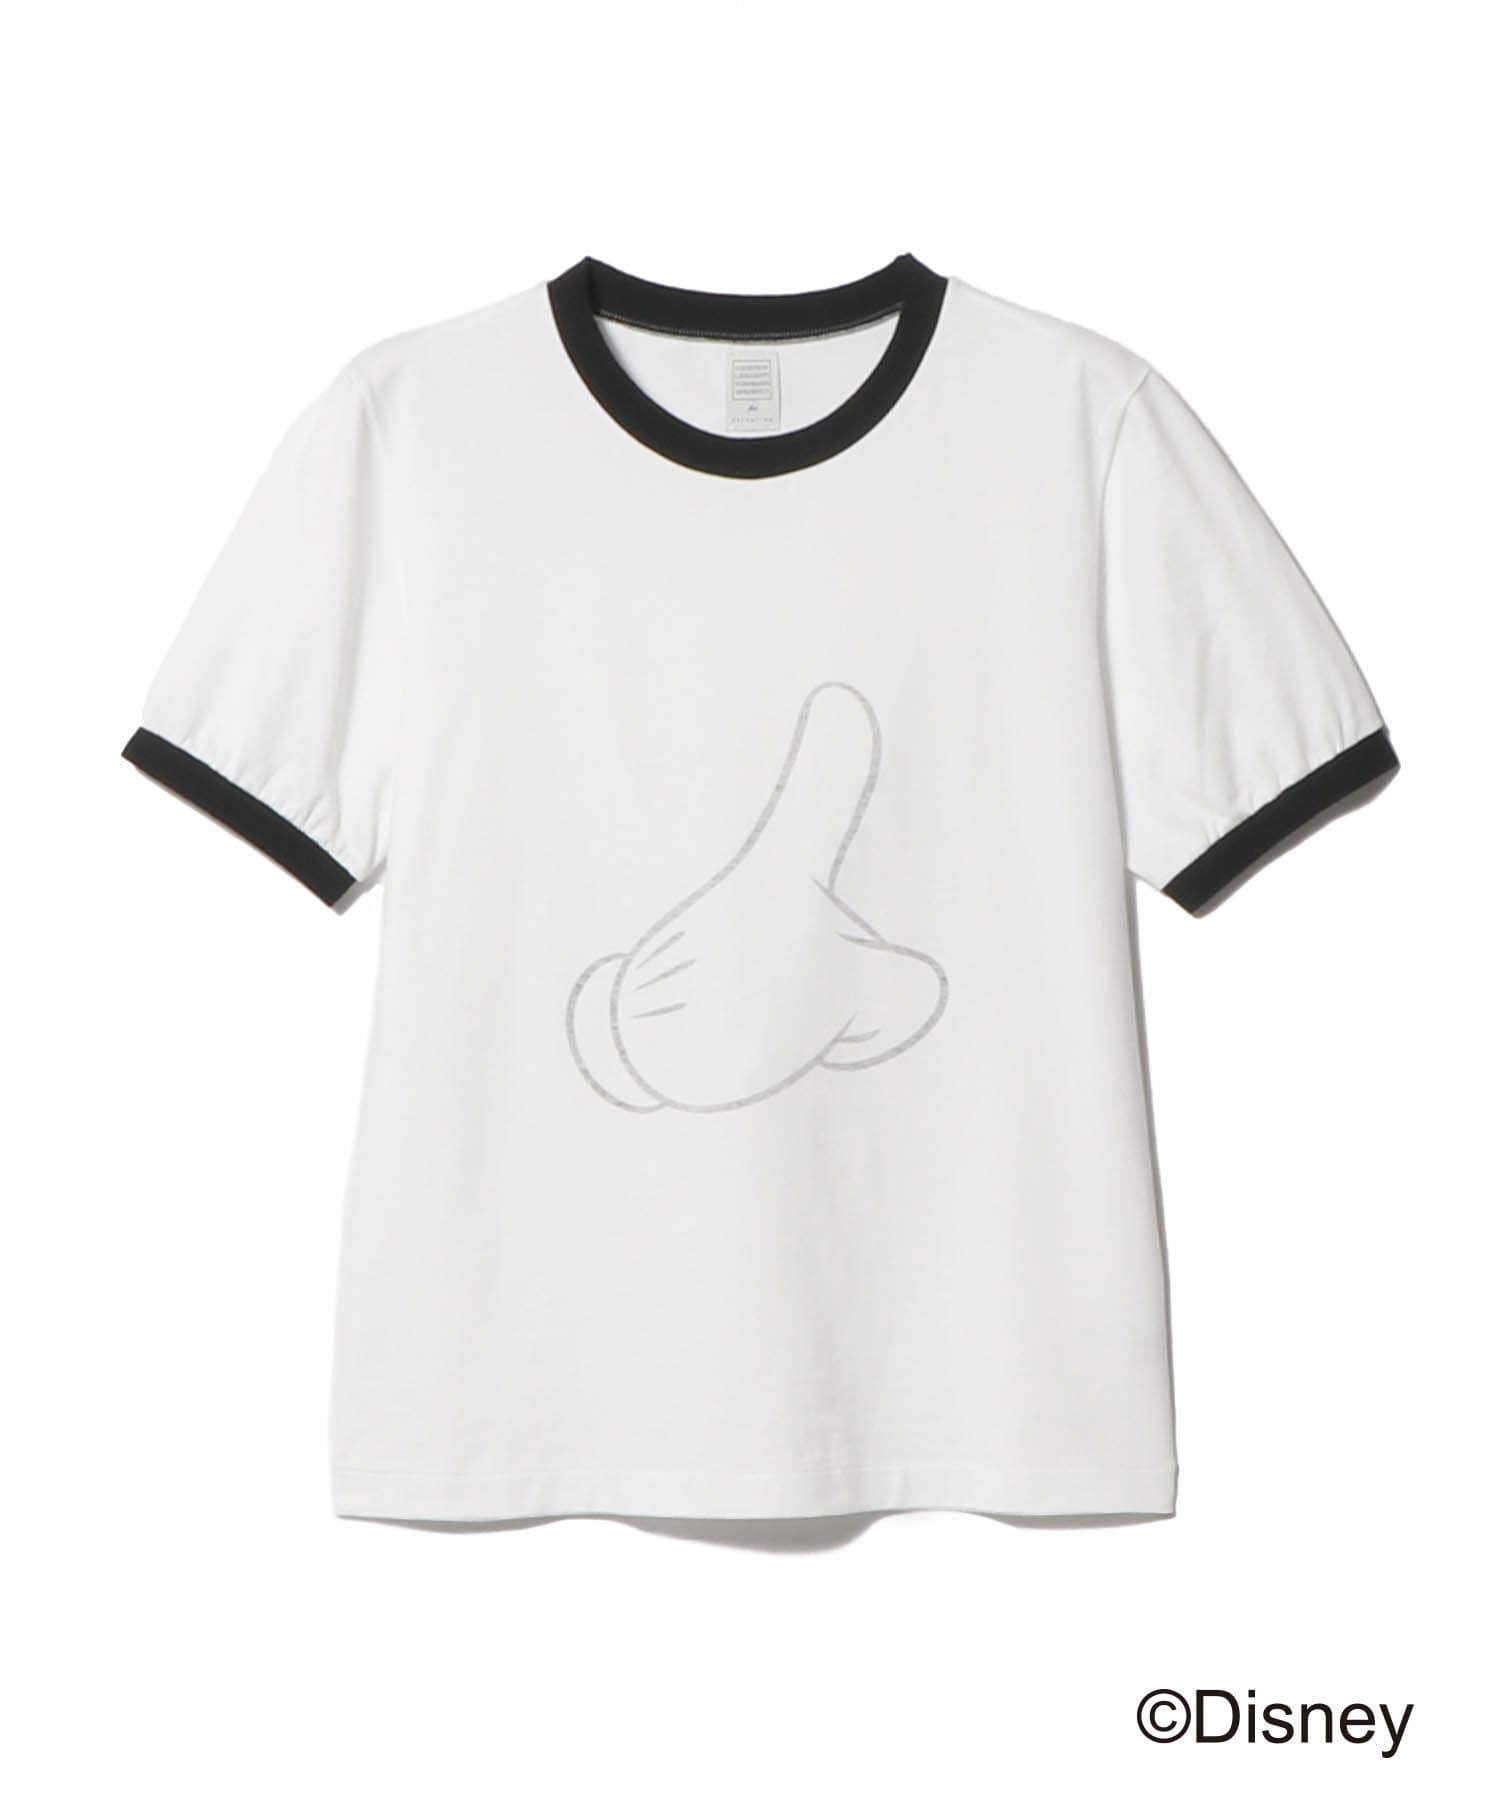 GOOD PEOPLE GOOD STITCHING GOOD PRODUCT for ESTNATION / ミッキーマウス  / シアーリンガーTシャツ